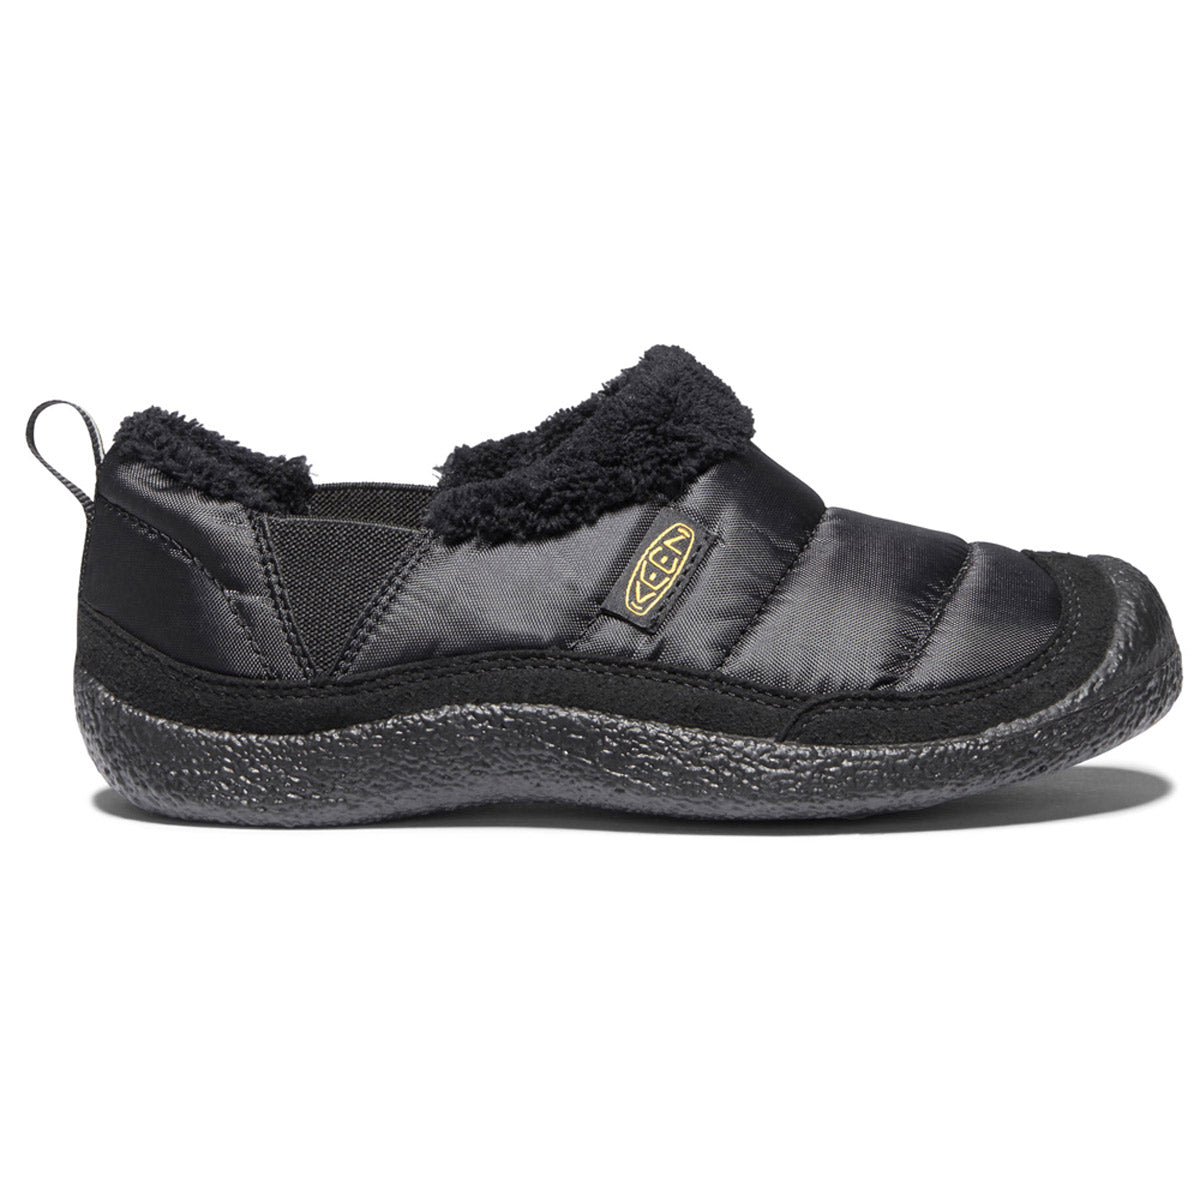 A single Keen Howser II Youth Black slip-on shoe with a fleece lining and rubber sole.